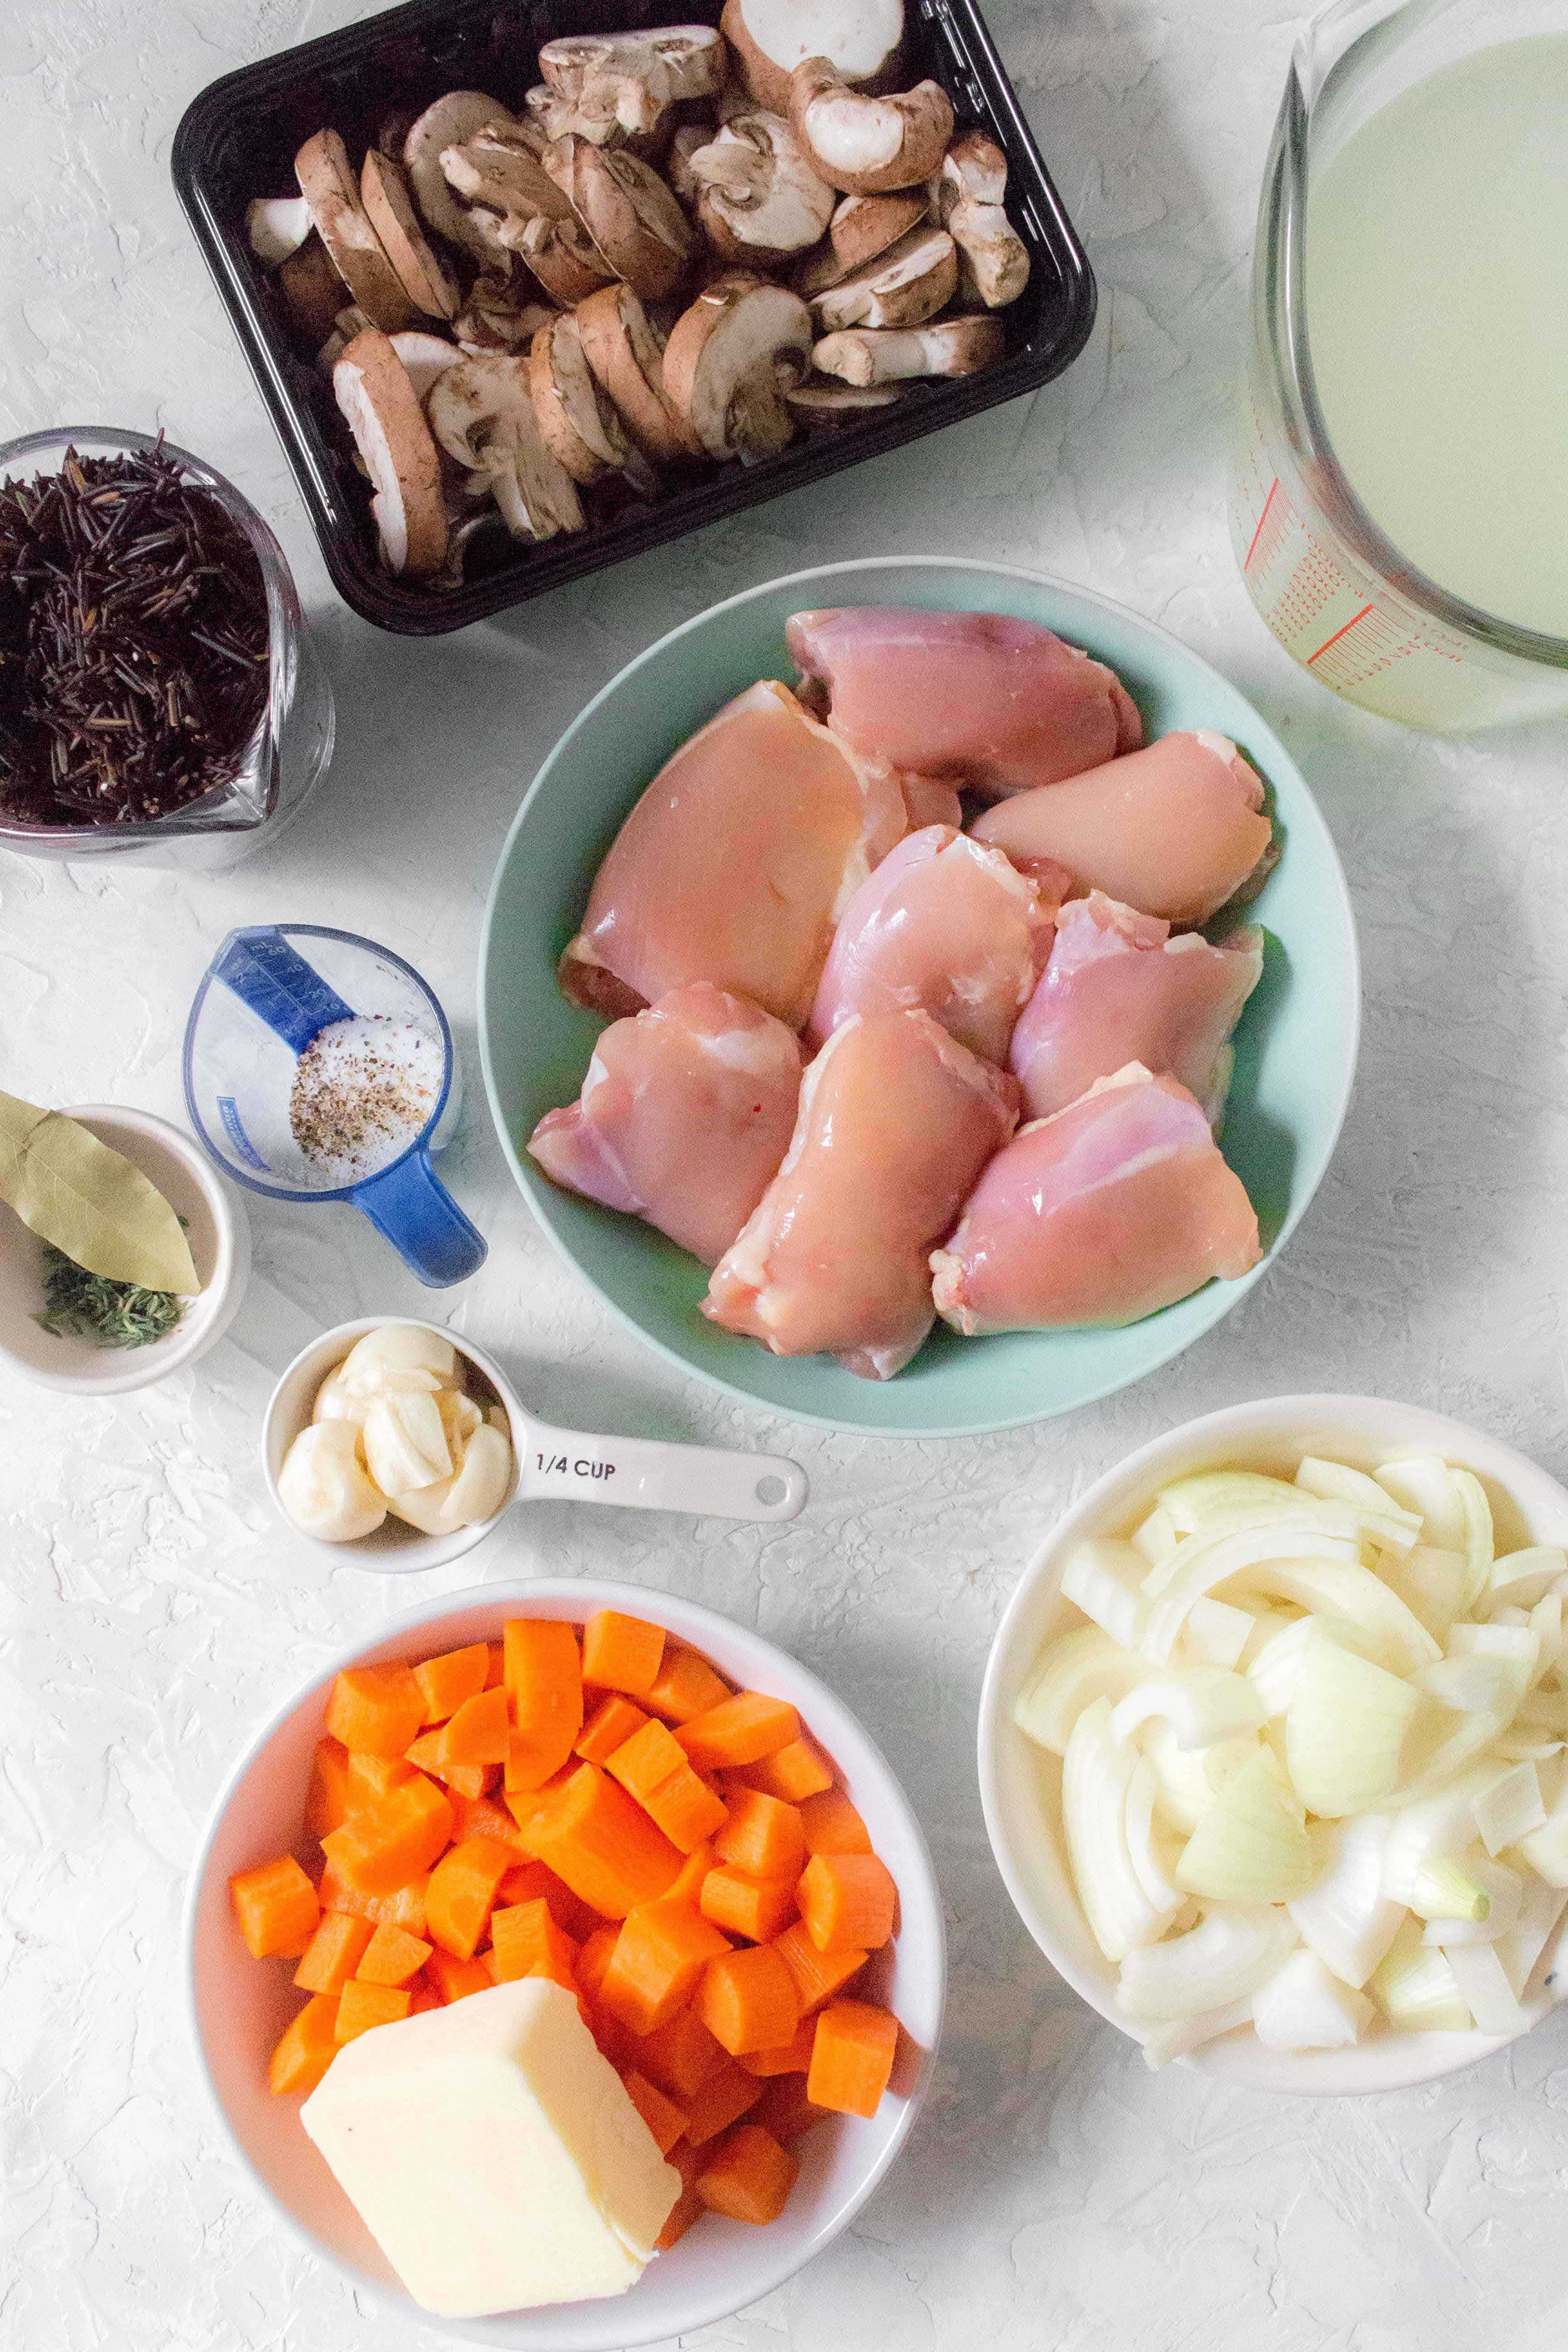 ingredients to make wild rice and chicken soup in an instant pot